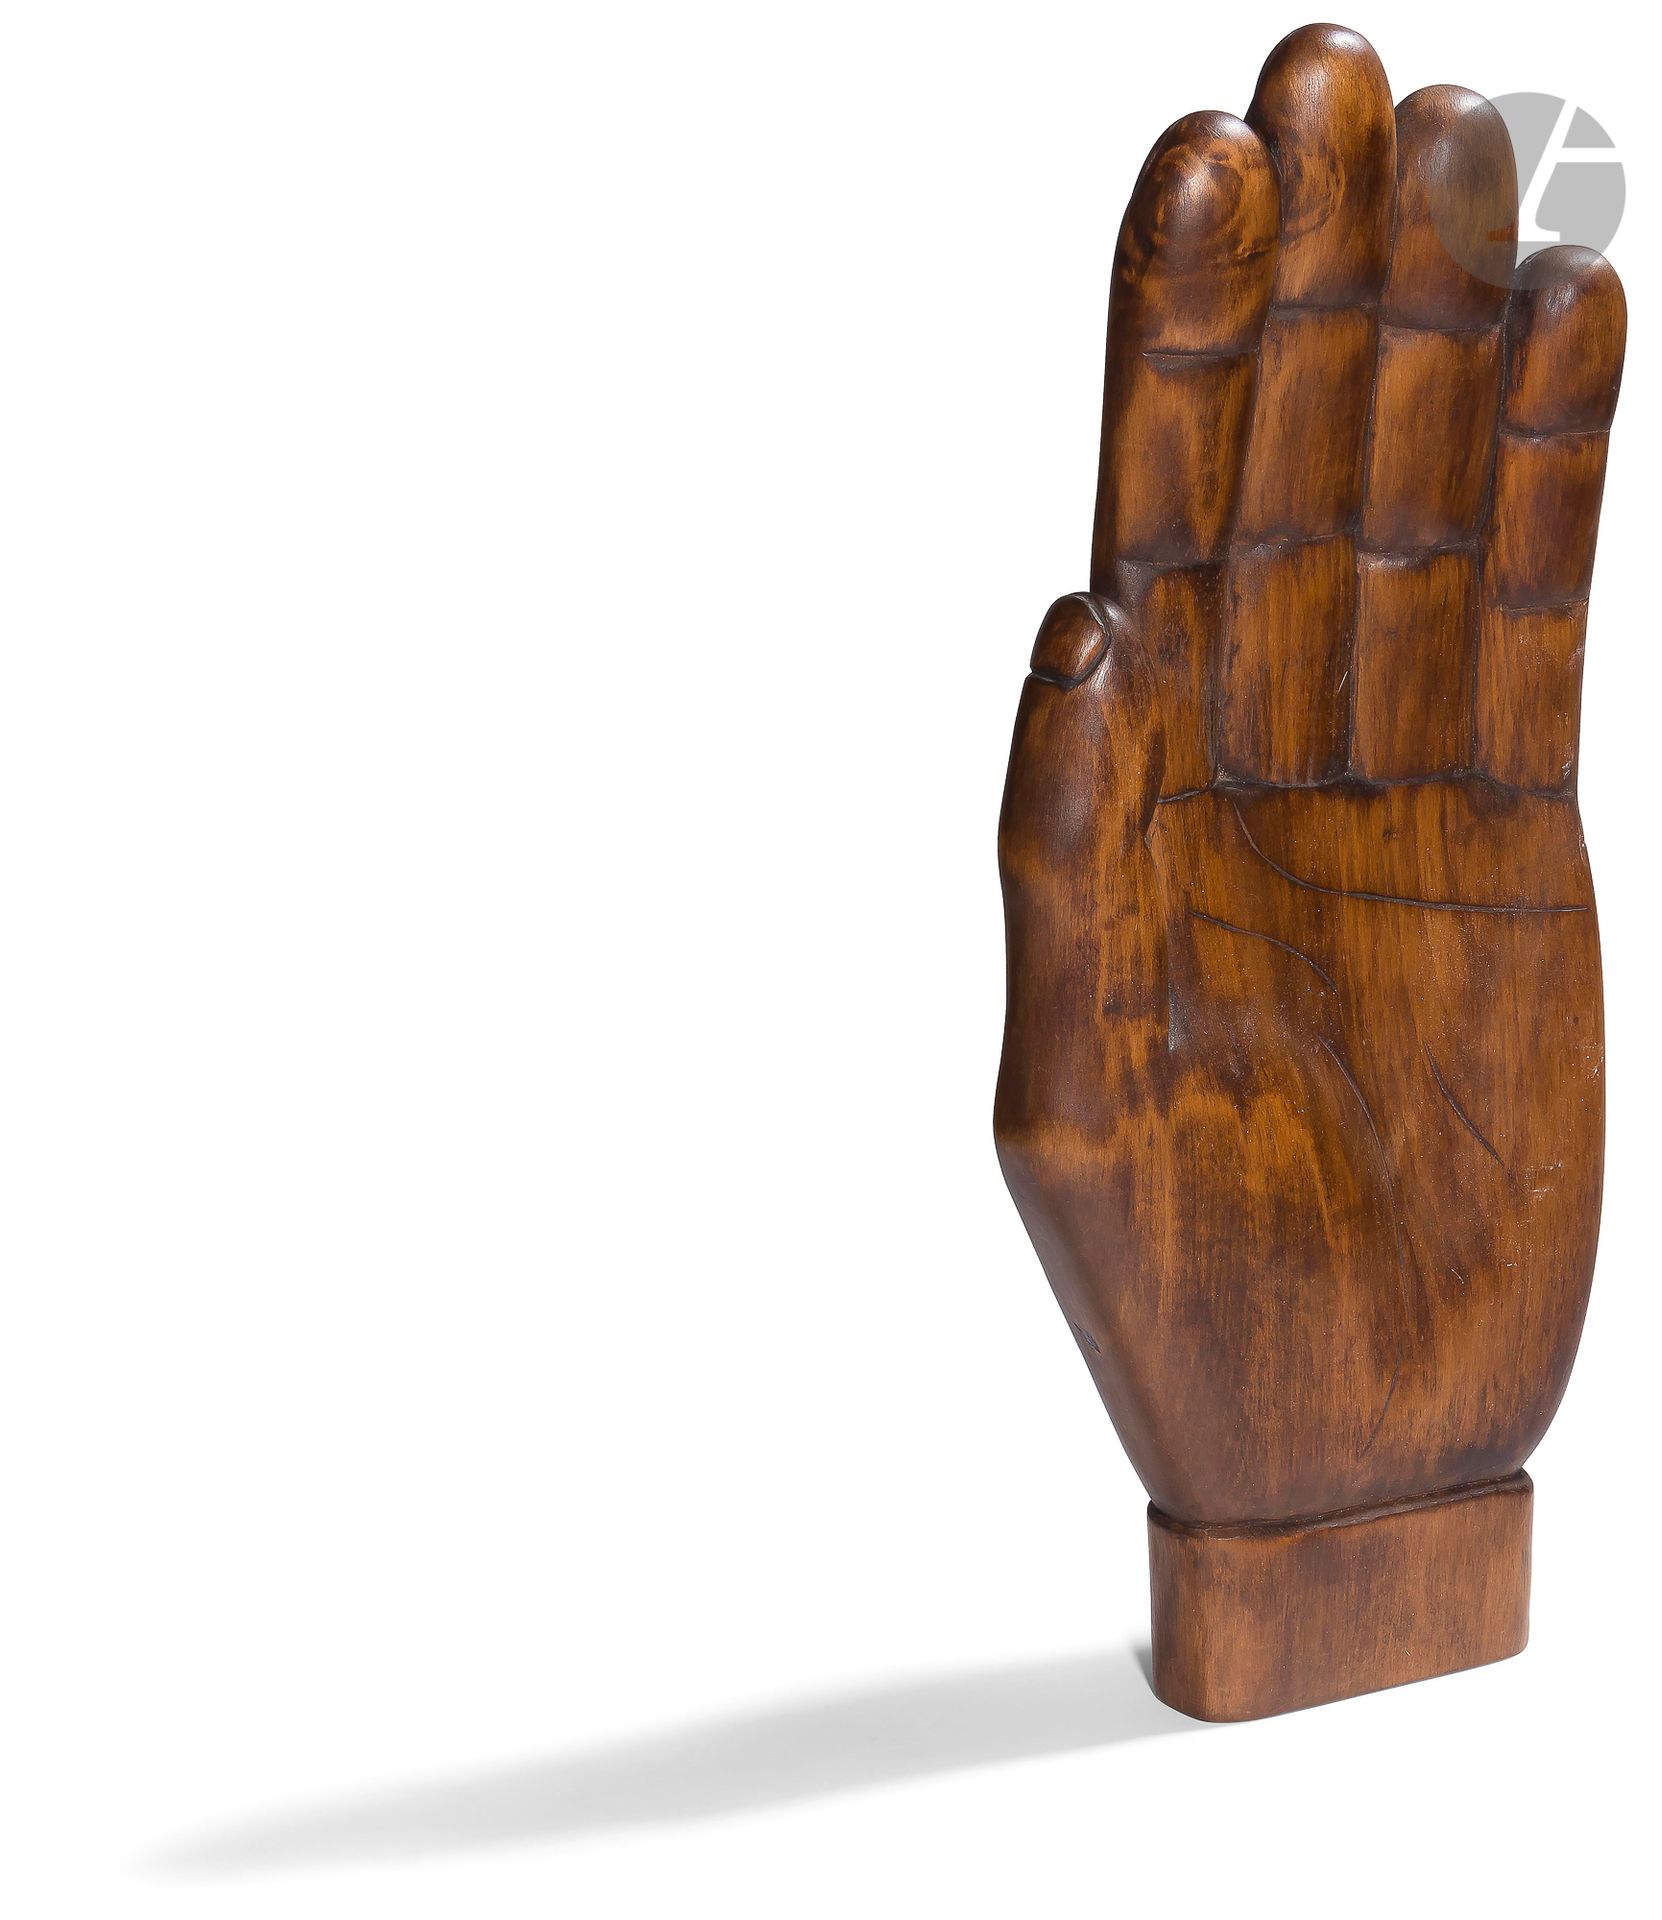 Null "
Large Indian hand in carved wood, in traditional position. 
54 x 24 cmB
.&hellip;